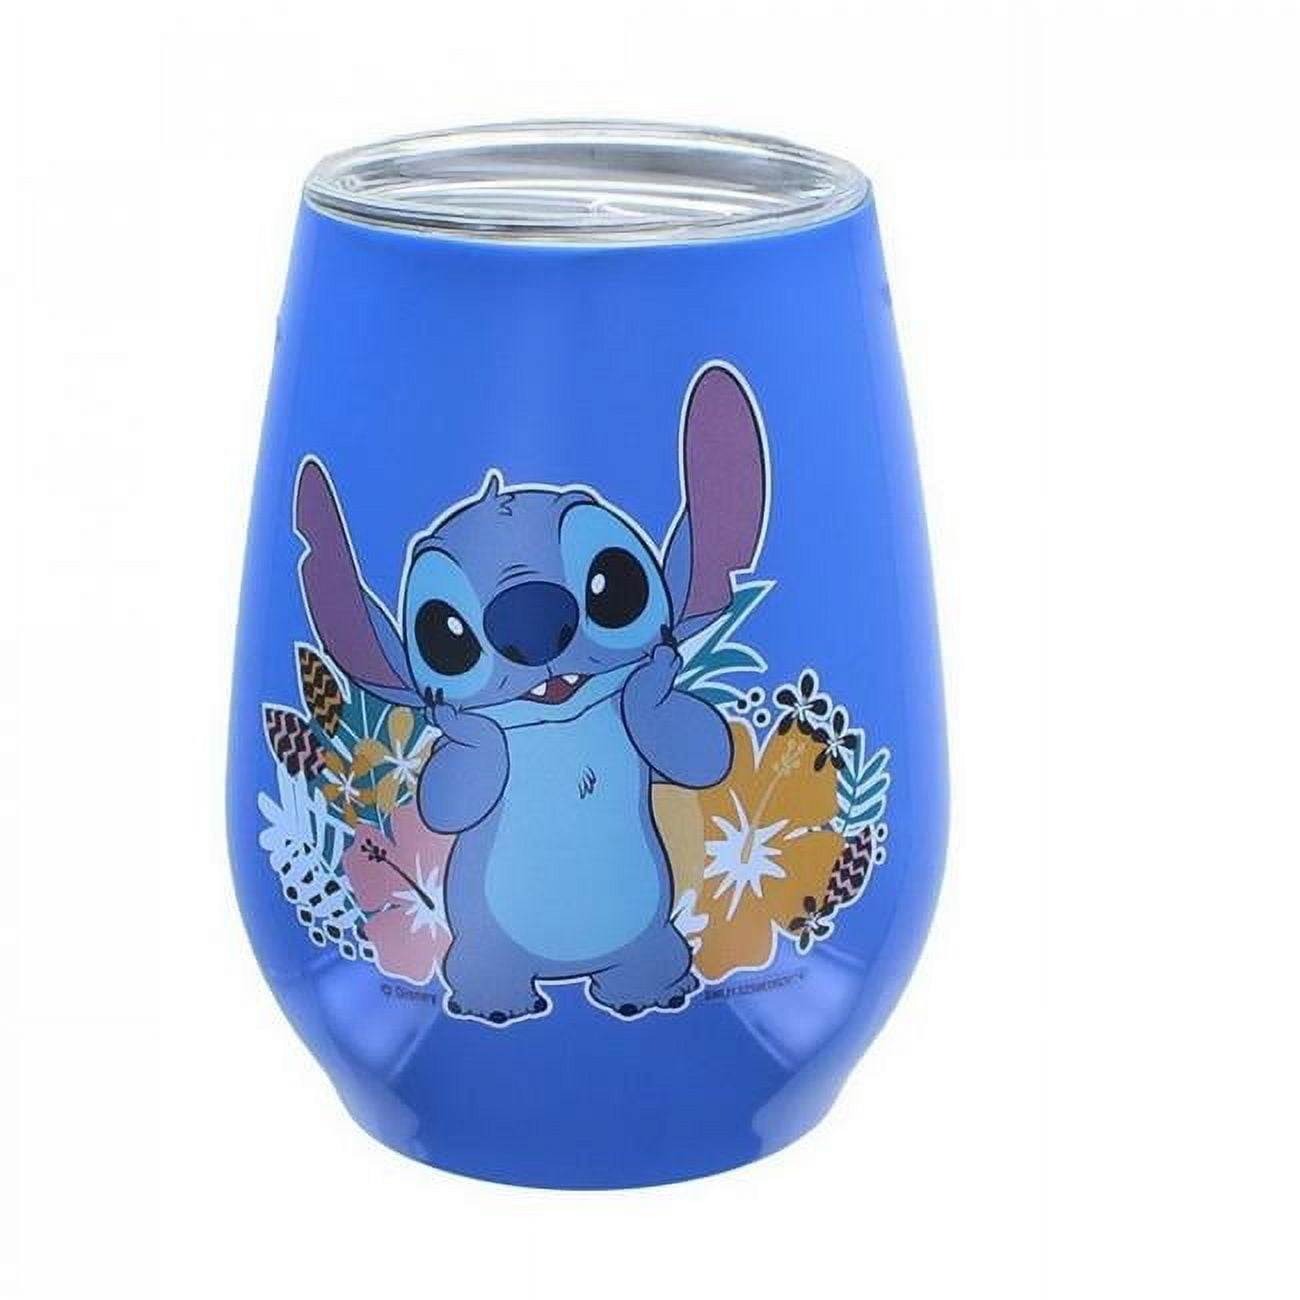 SMB ENTERPRISES Teddy Cartoon Stitch Thermos Cup Stainless